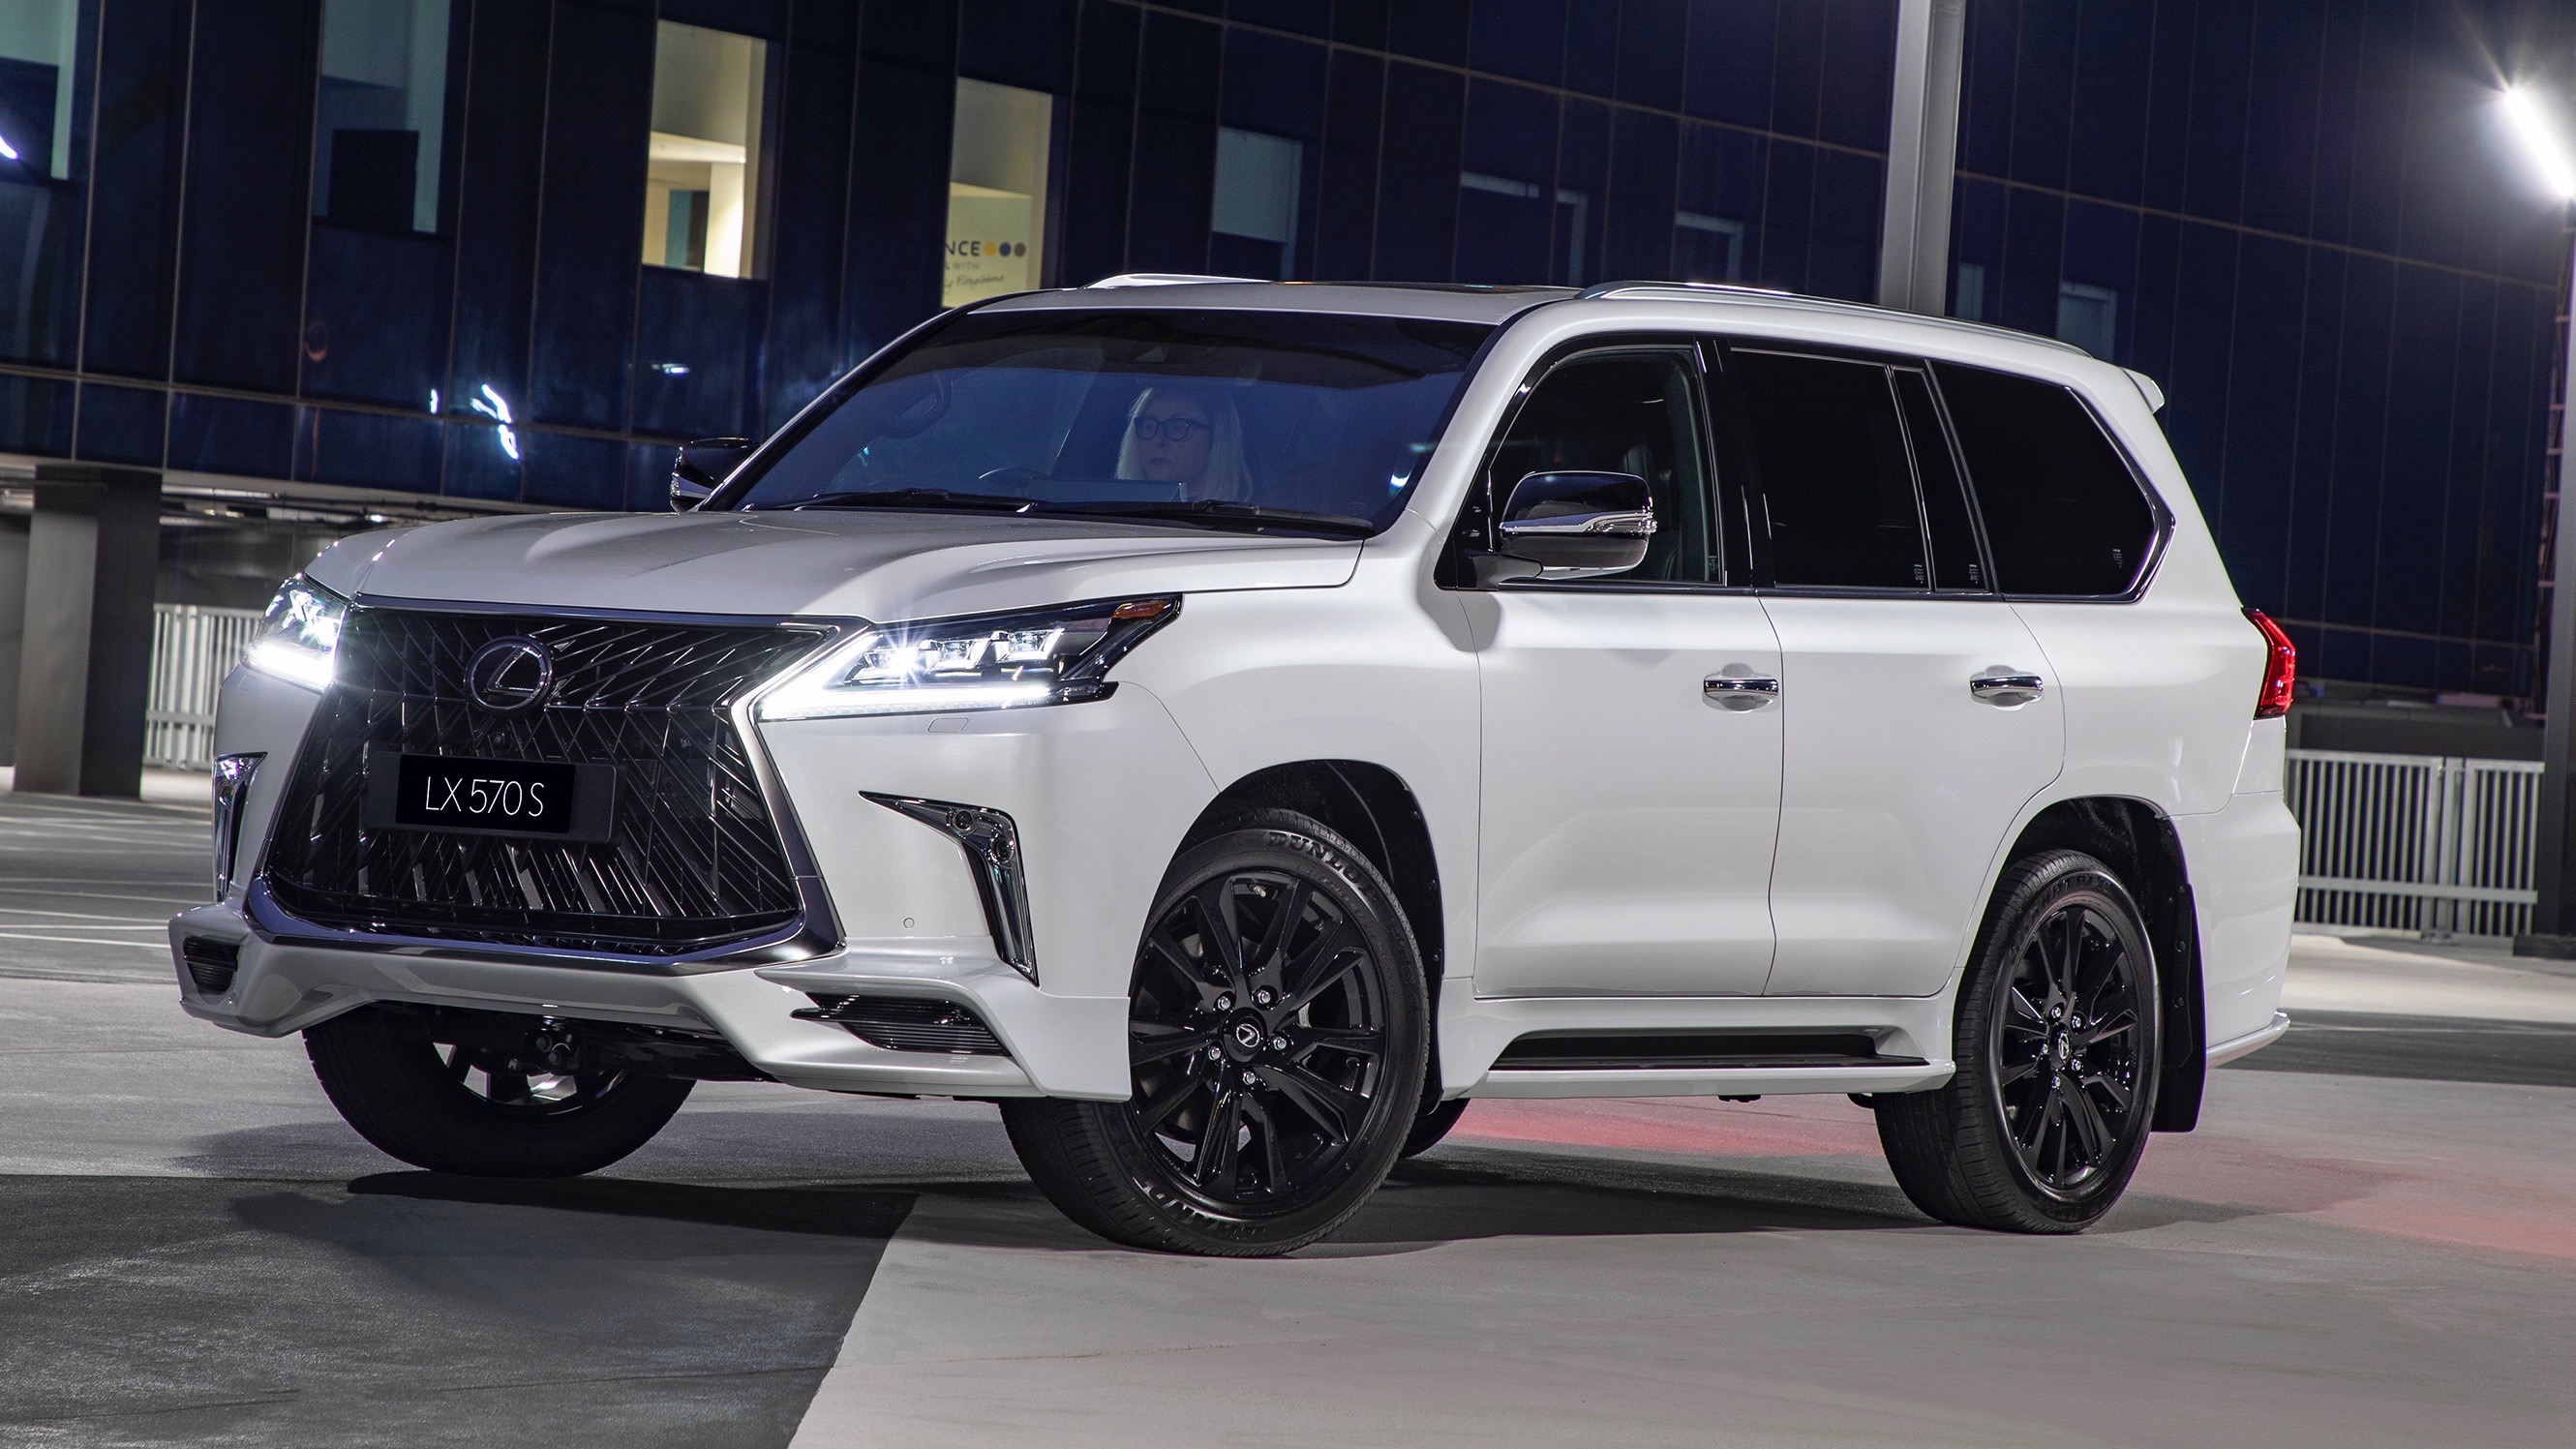 2019 Lexus LX 570 S Debuts in Australia With Angry Body